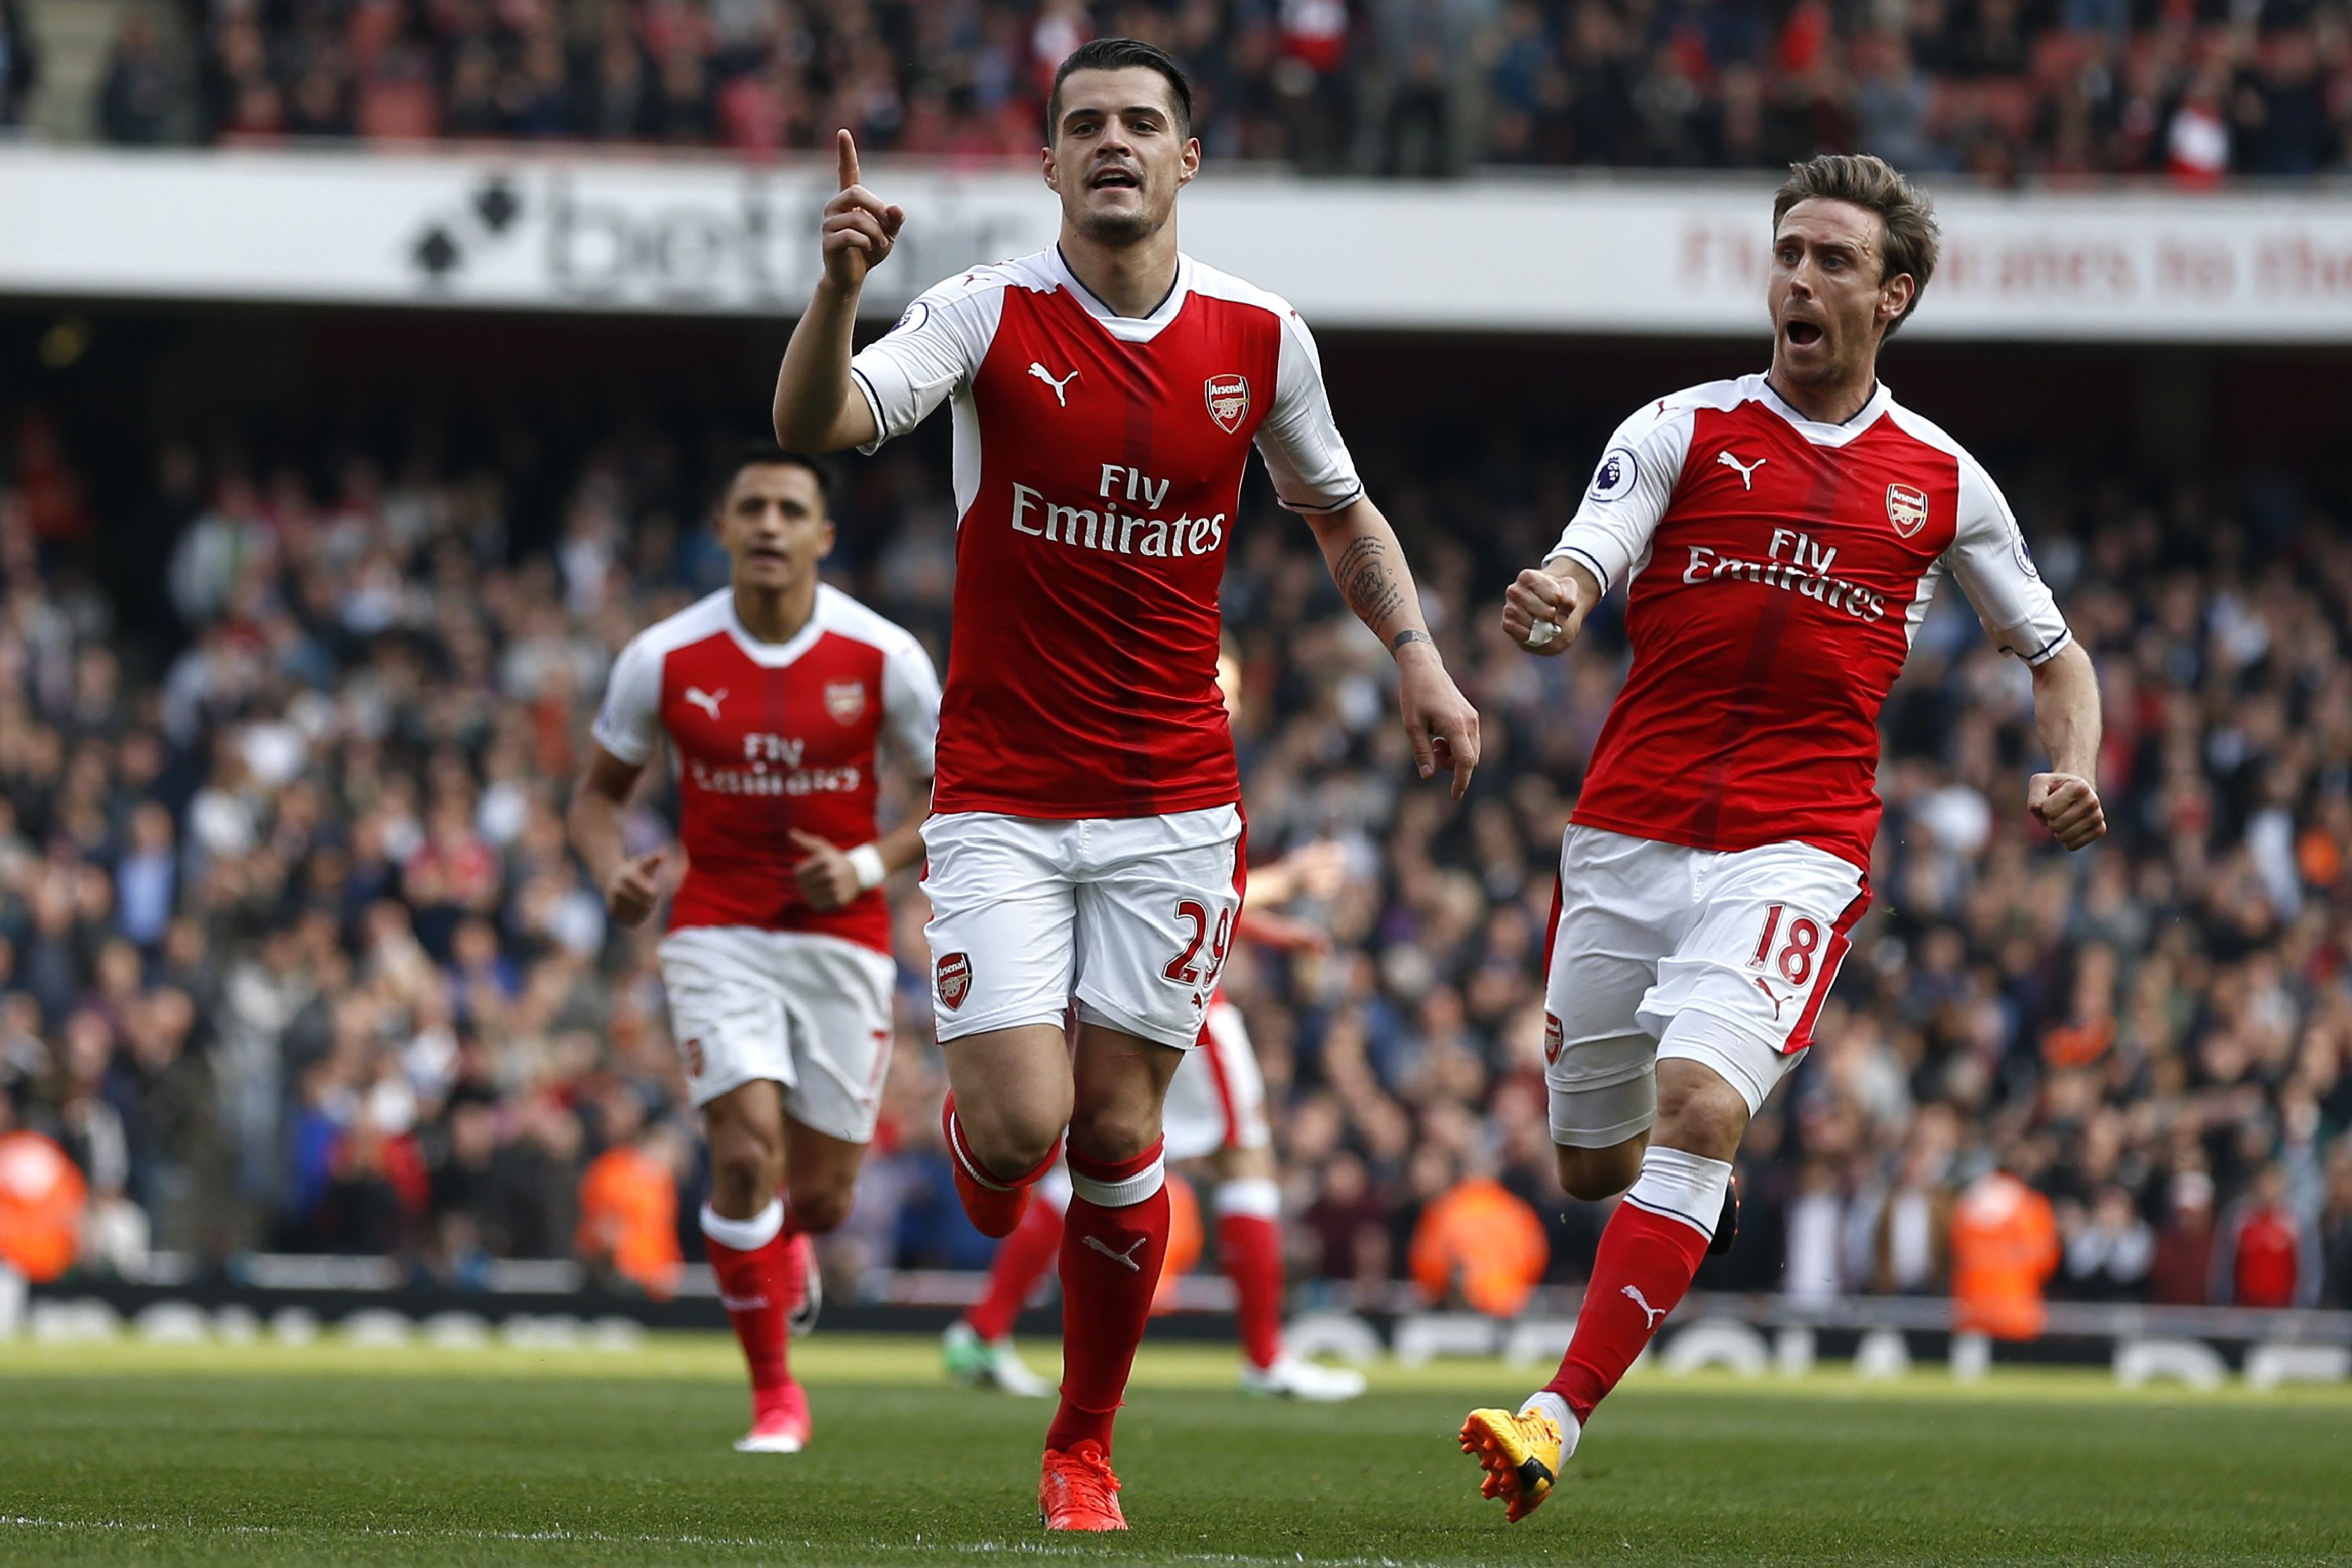 Arsenal 2-0 Manchester United: Highlights and recap